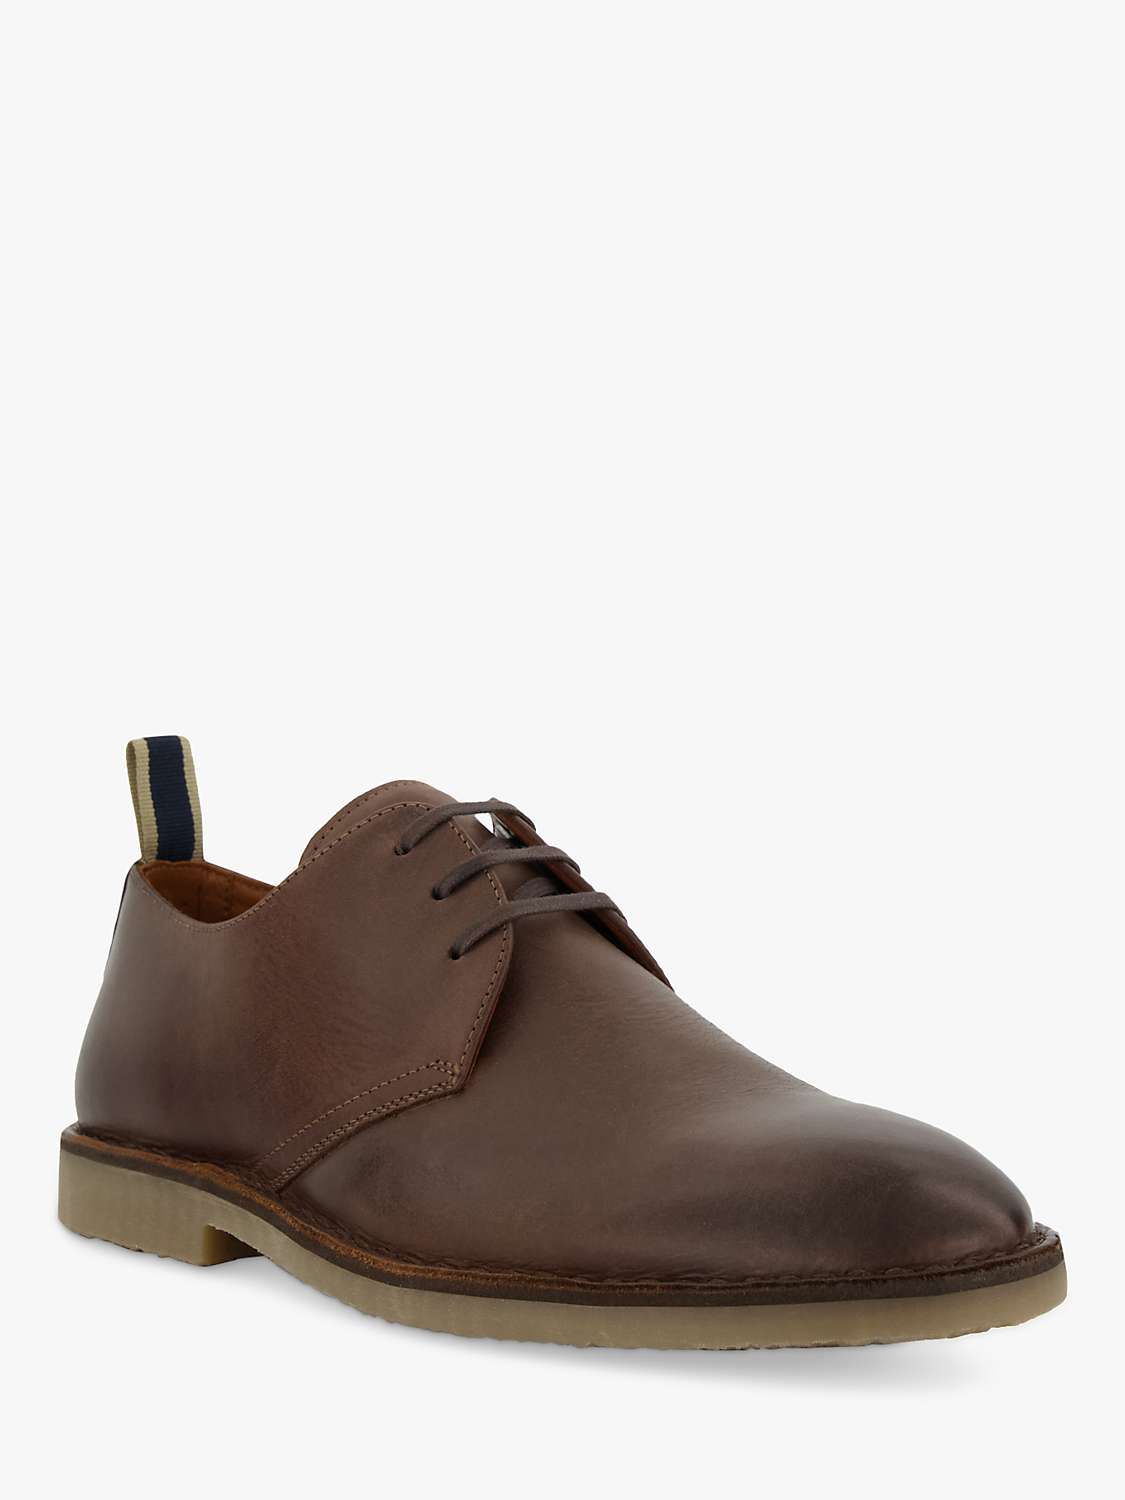 Buy Dune Brooked Leather Chukka Shoes Online at johnlewis.com